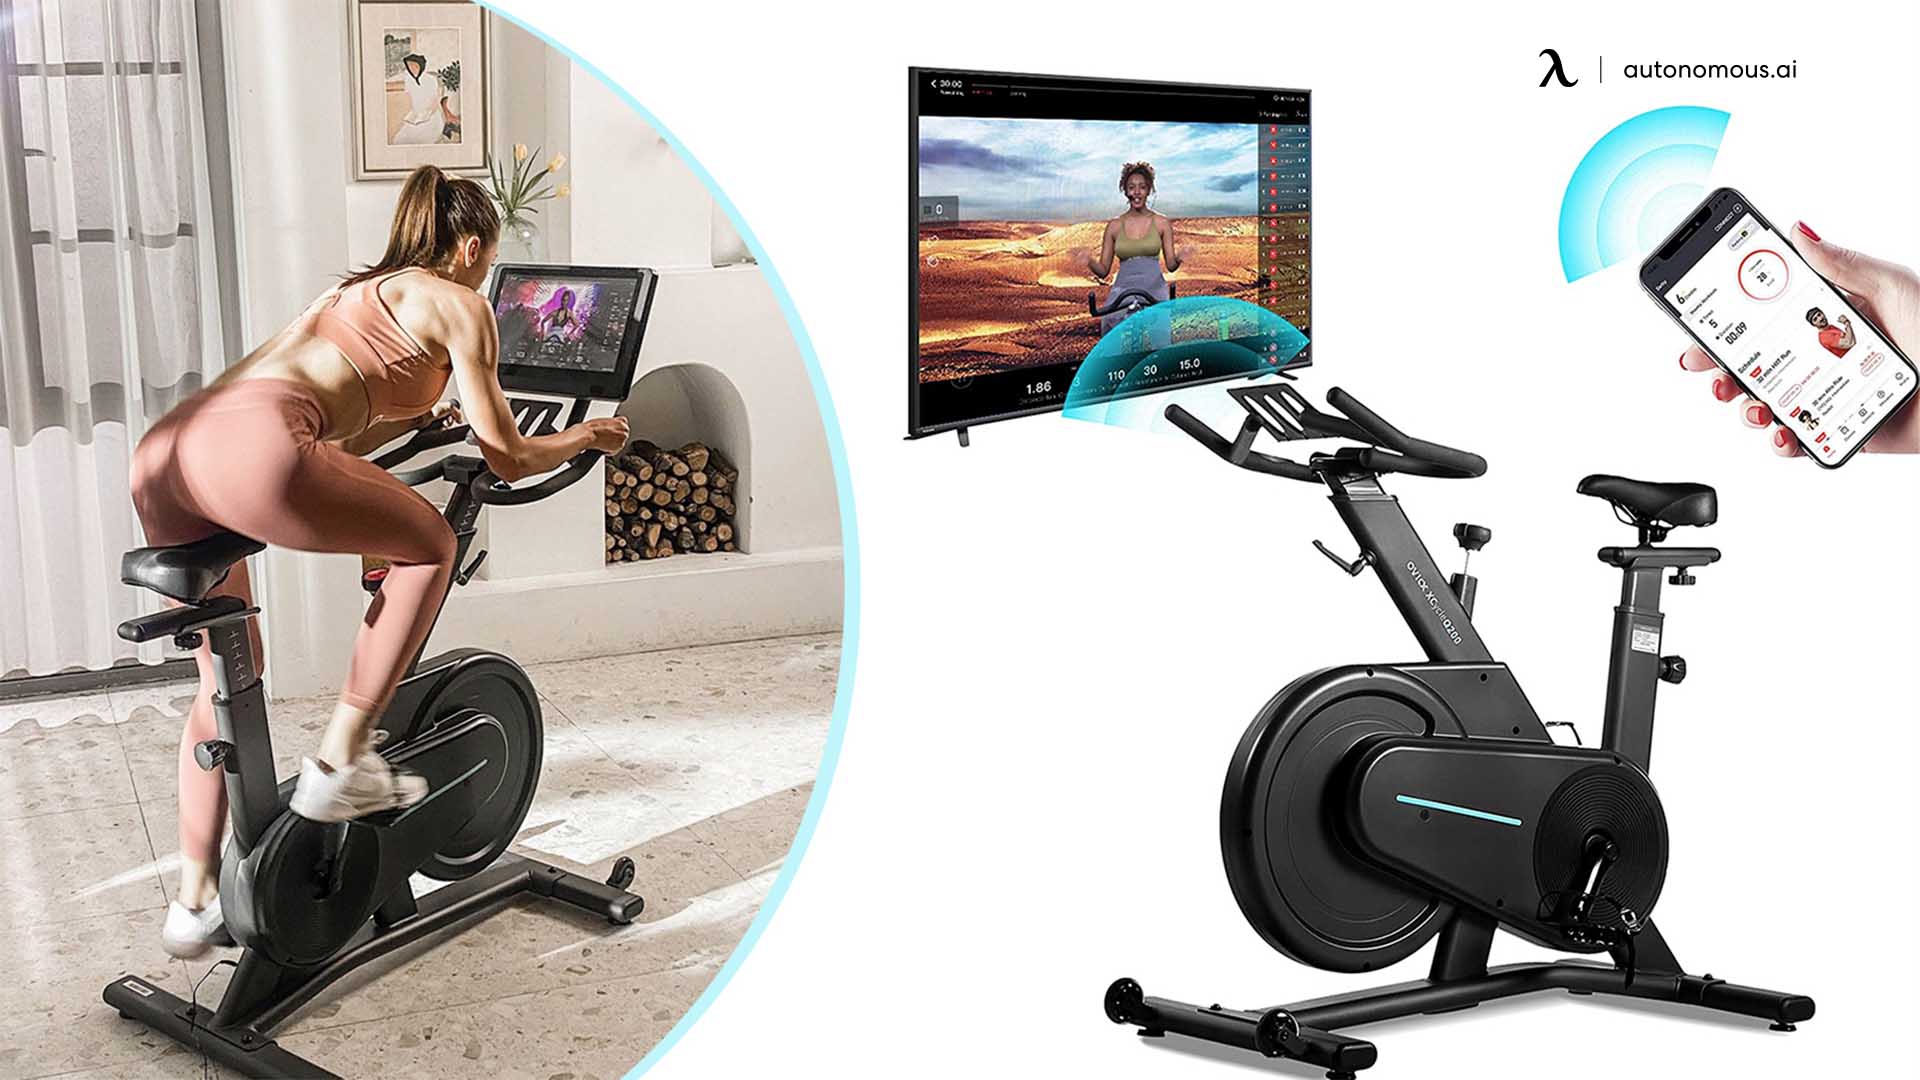 One of the great options is an Ovicx indoor cycling bike